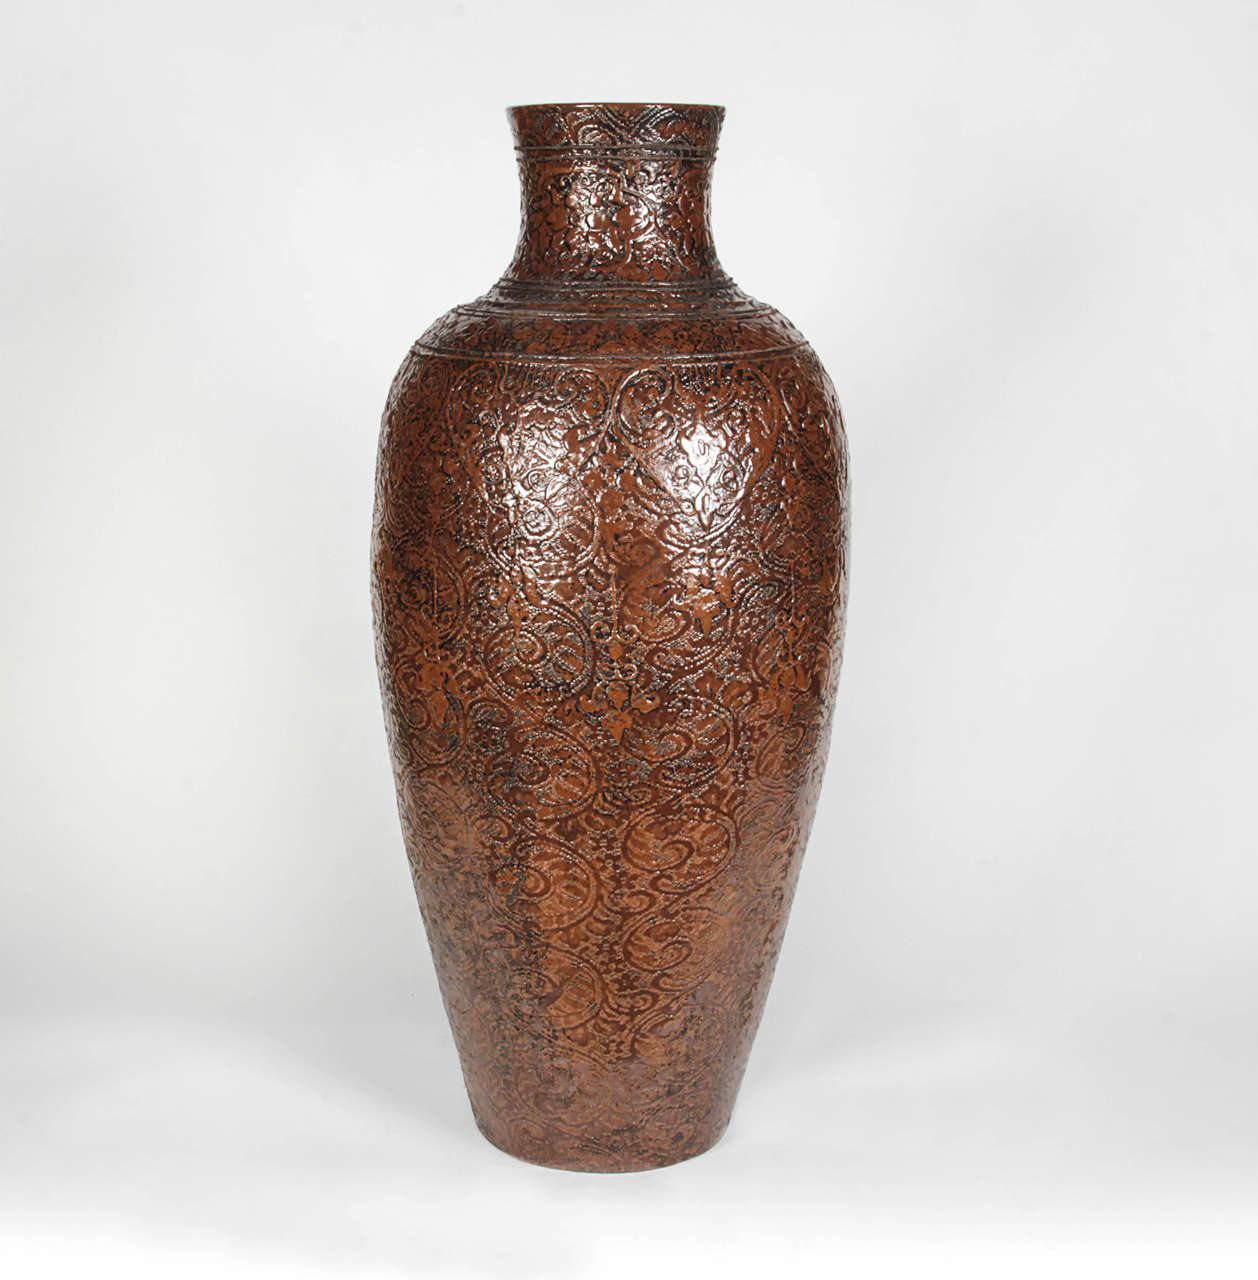 Brown and Black Thai ceramic vase with scroll work in shiny finish. Curated and personally selected by Donna Karan for her Urban Zen brand.